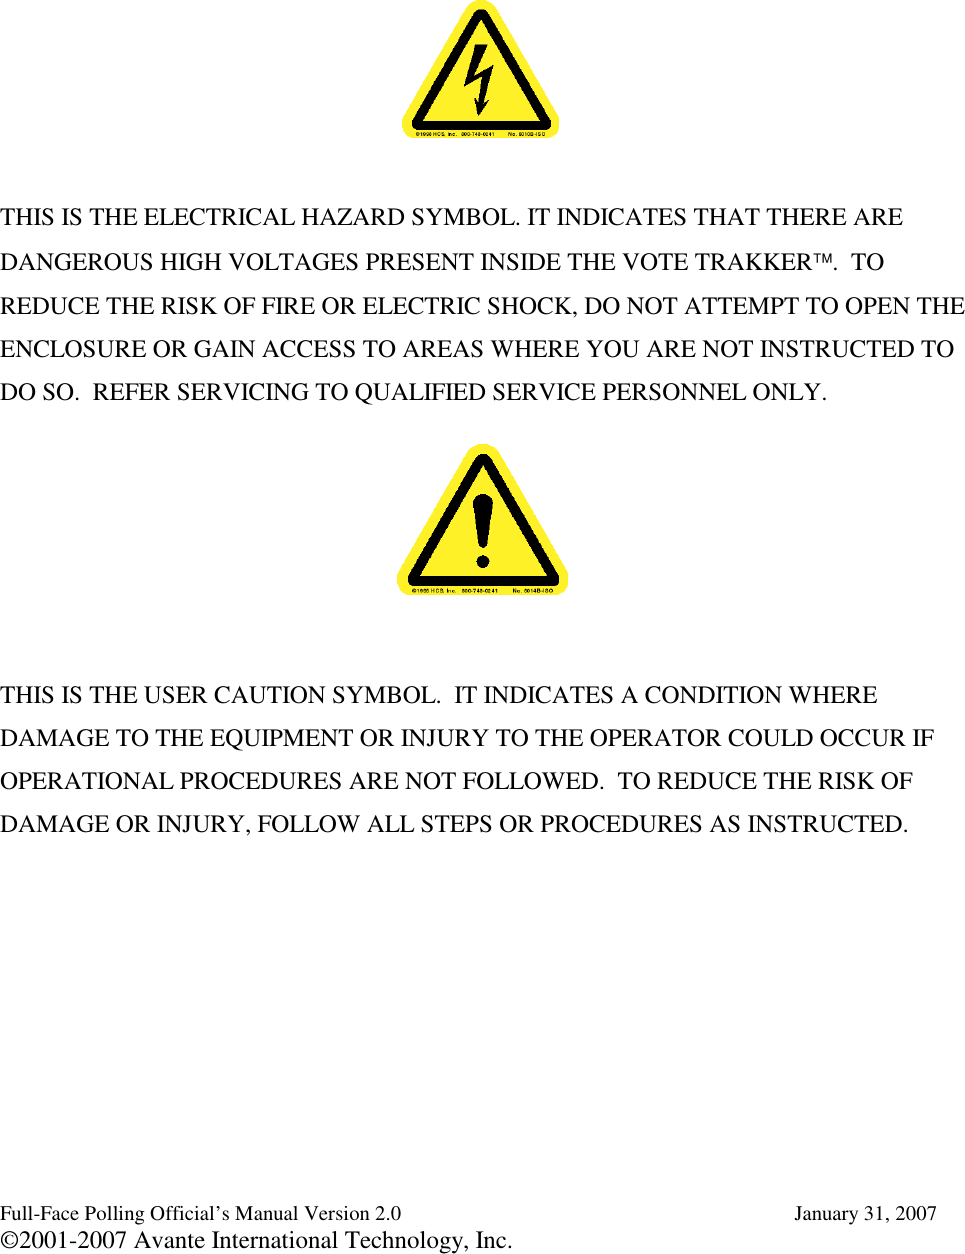 Full-Face Polling Official’s Manual Version 2.0 January 31, 2007©2001-2007 Avante International Technology, Inc.THIS IS THE ELECTRICAL HAZARD SYMBOL. IT INDICATES THAT THERE AREDANGEROUS HIGH VOLTAGES PRESENT INSIDE THE VOTE TRAKKER. TOREDUCE THE RISK OF FIRE OR ELECTRIC SHOCK, DO NOT ATTEMPT TO OPEN THEENCLOSURE OR GAIN ACCESS TO AREAS WHERE YOU ARE NOT INSTRUCTED TODO SO. REFER SERVICING TO QUALIFIED SERVICE PERSONNEL ONLY.THIS IS THE USER CAUTION SYMBOL. IT INDICATES A CONDITION WHEREDAMAGE TO THE EQUIPMENT OR INJURY TO THE OPERATOR COULD OCCUR IFOPERATIONAL PROCEDURES ARE NOT FOLLOWED. TO REDUCE THE RISK OFDAMAGE OR INJURY, FOLLOW ALL STEPS OR PROCEDURES AS INSTRUCTED.